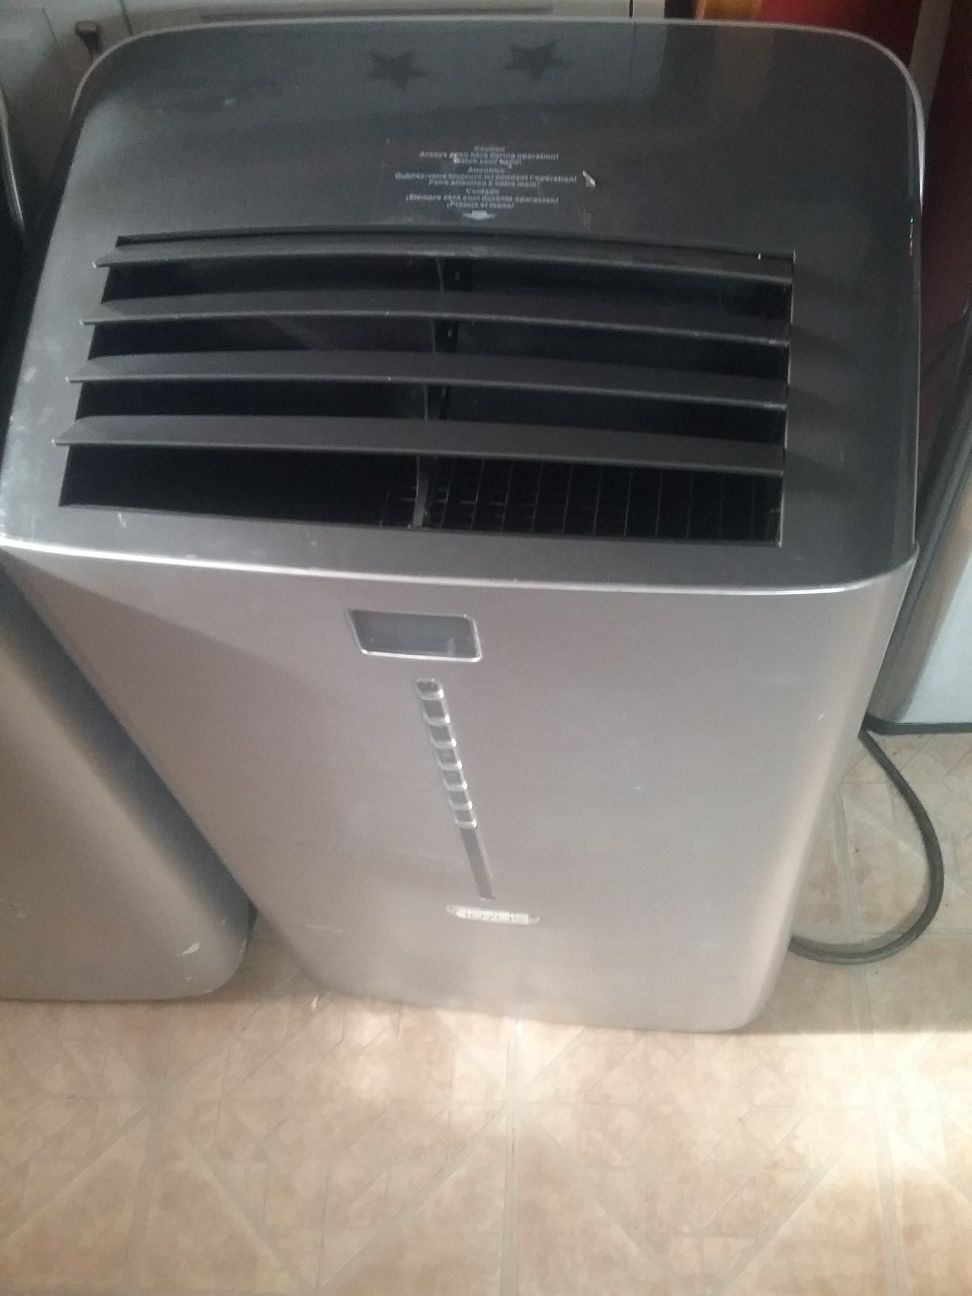 Idylis portable air conditioner with dehumidifier